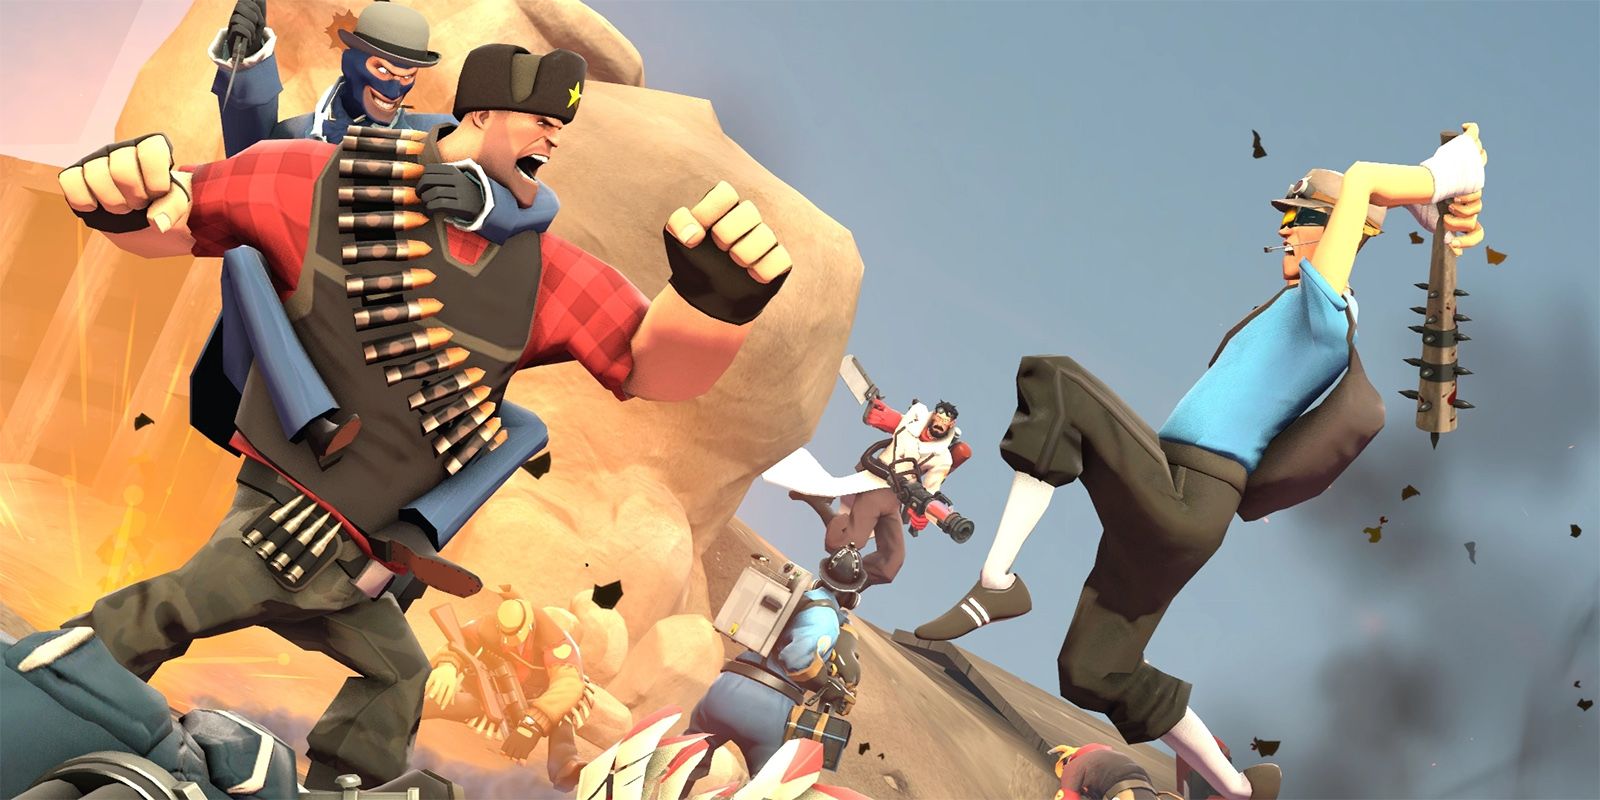 Team Fortress 2 Porn - Team Fortress 2's Bot Hackers Are Now Extorting Players For Immunity